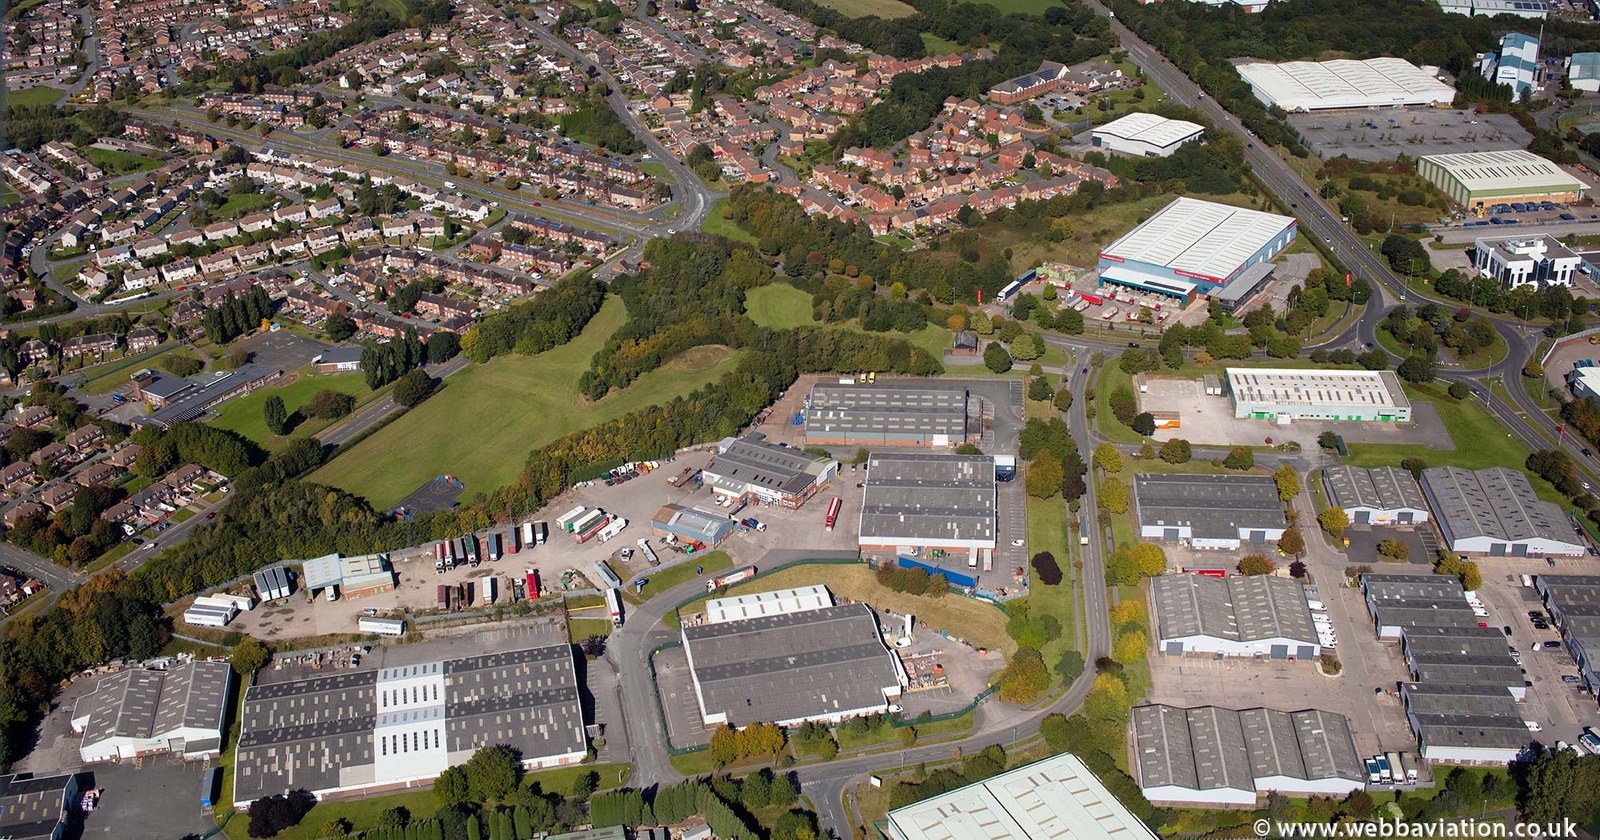 Rosevale Business Park  , Newcastle-under-Lyme  Staffordshire  from the air 